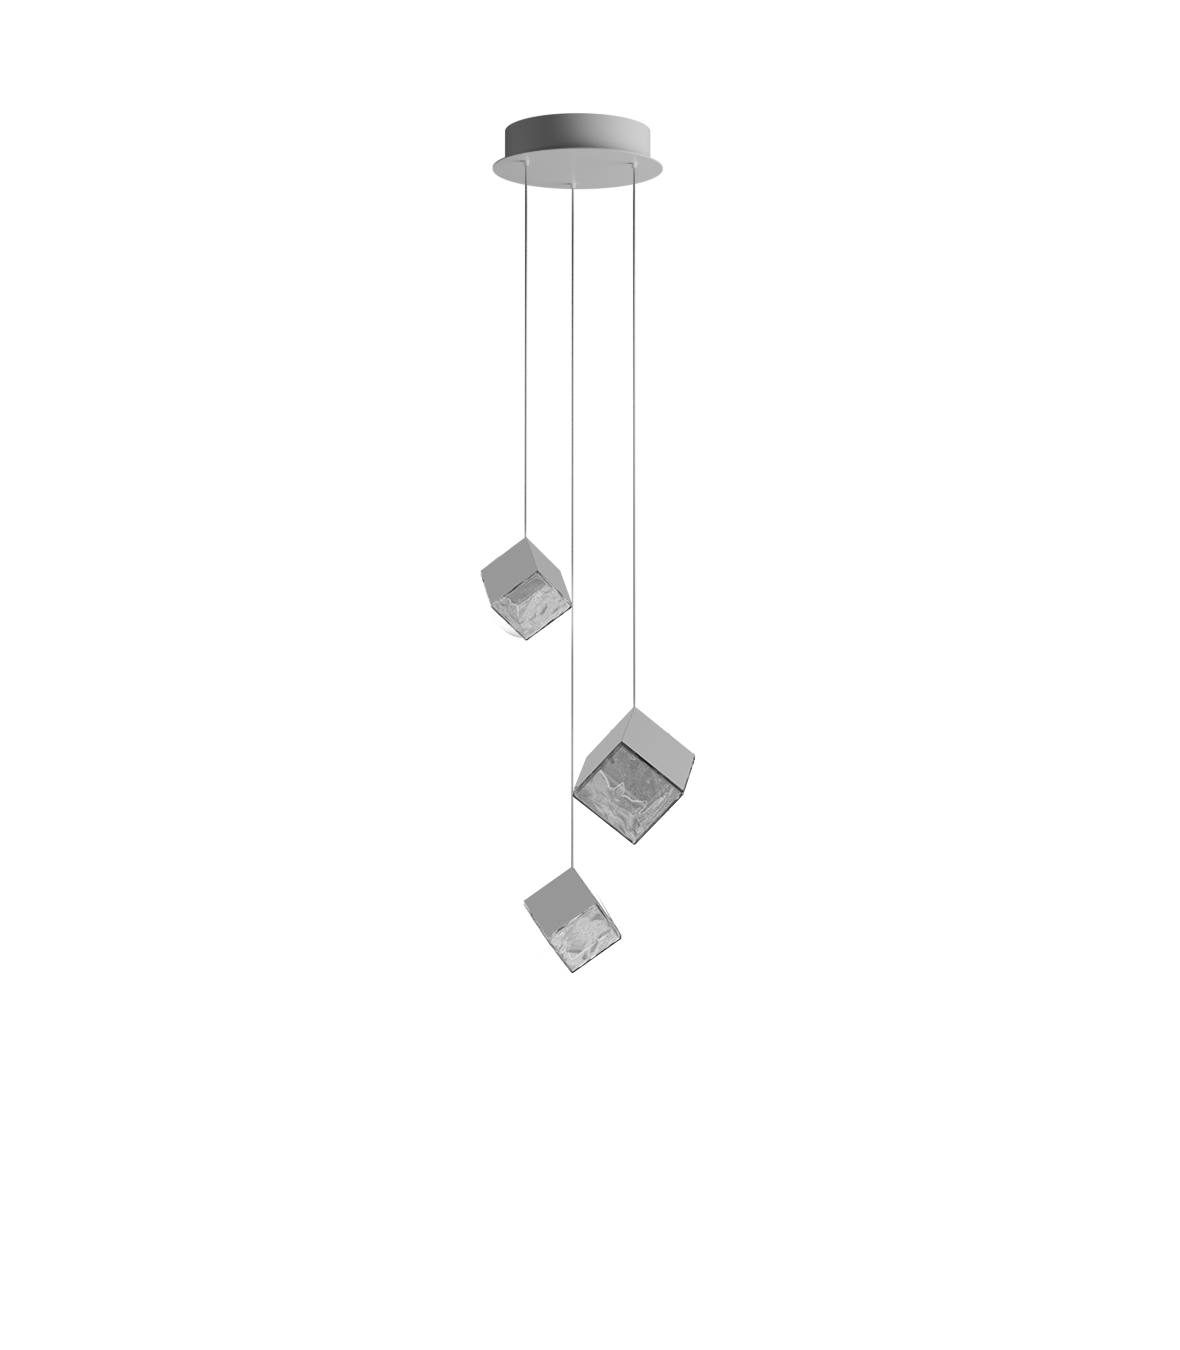 Bomma-Pyrite-Chandelier-3-stainless-steel